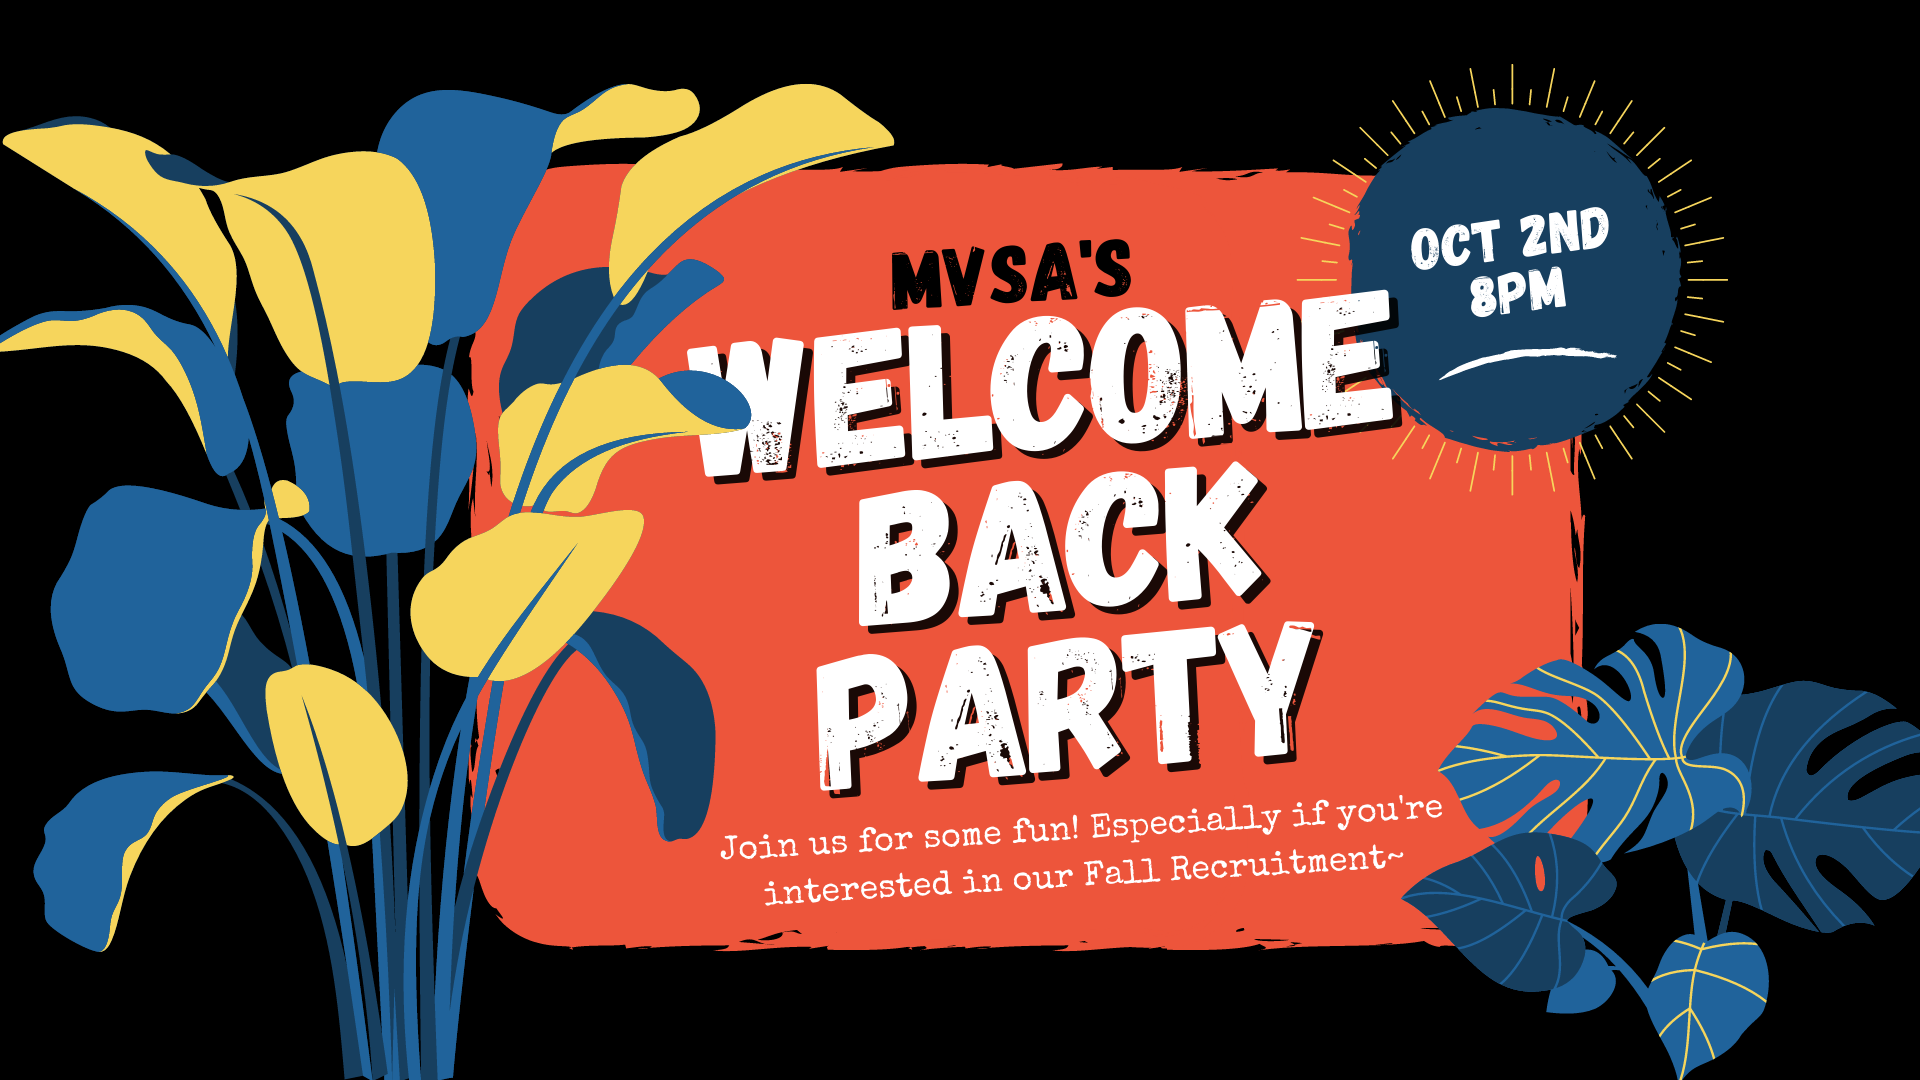 MVSA's Welcome Back Party